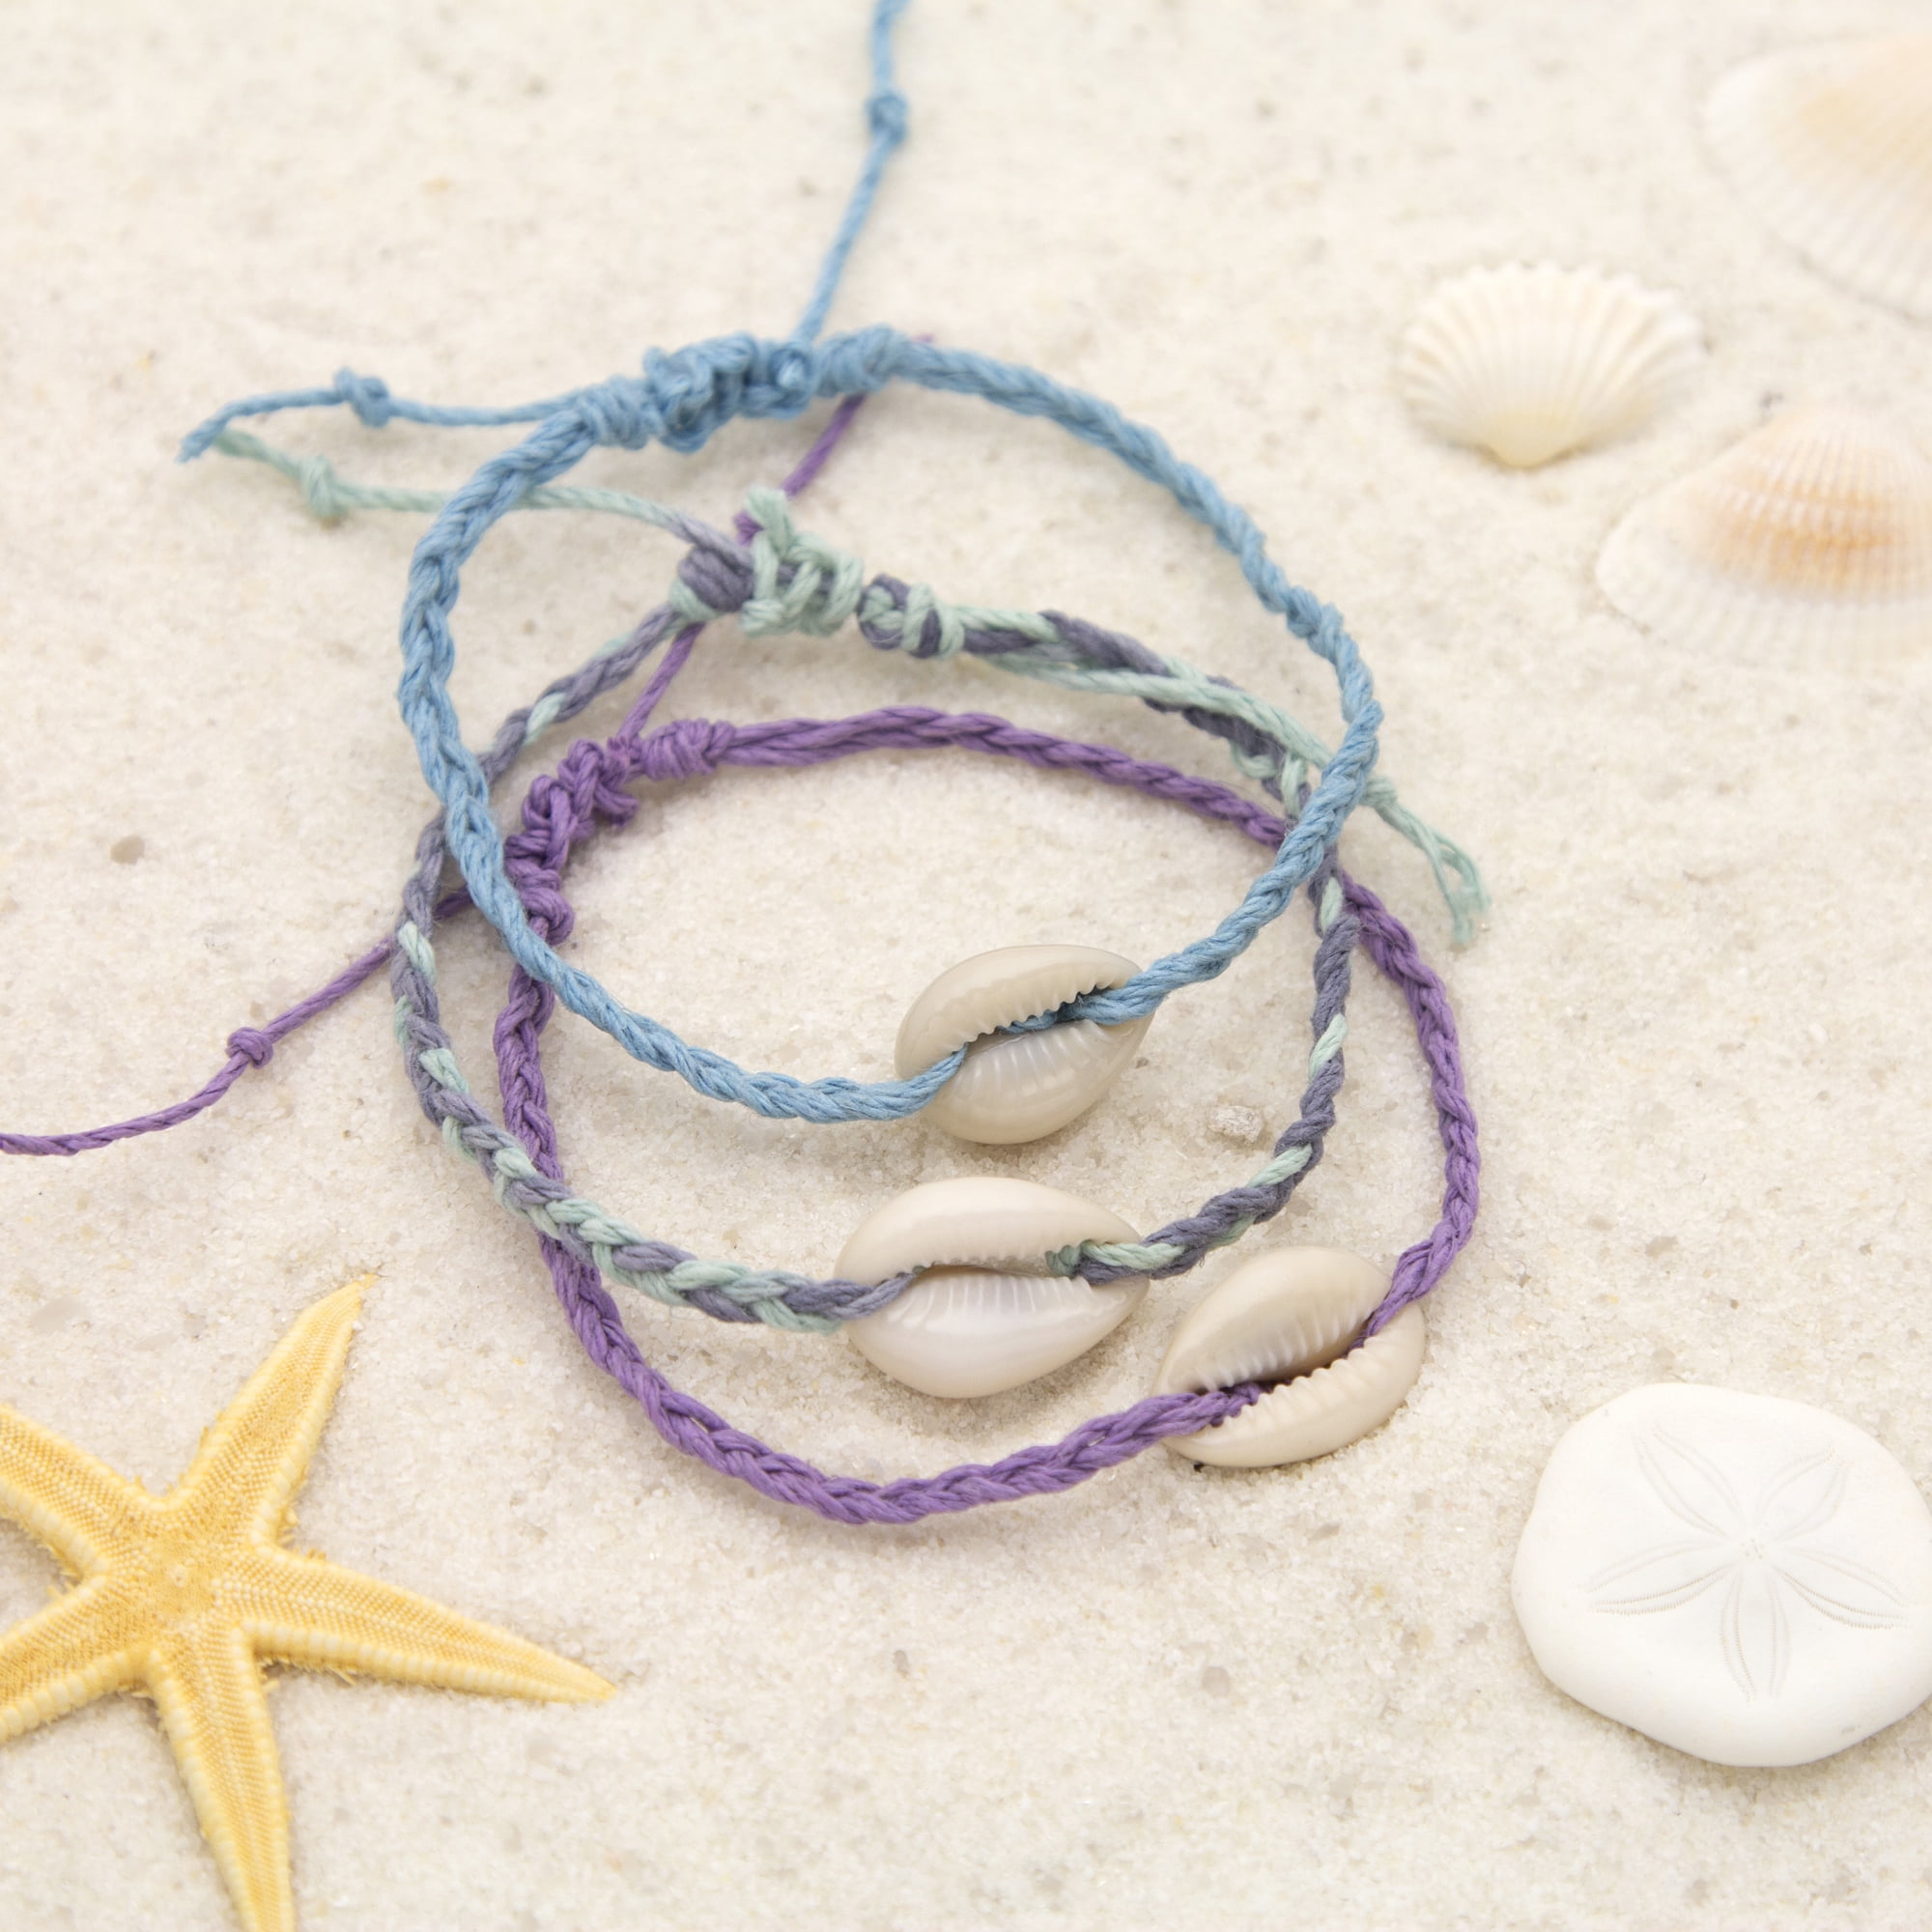 Shop for the newest MultiCraft Jewellery Craft Cord: Suede Look